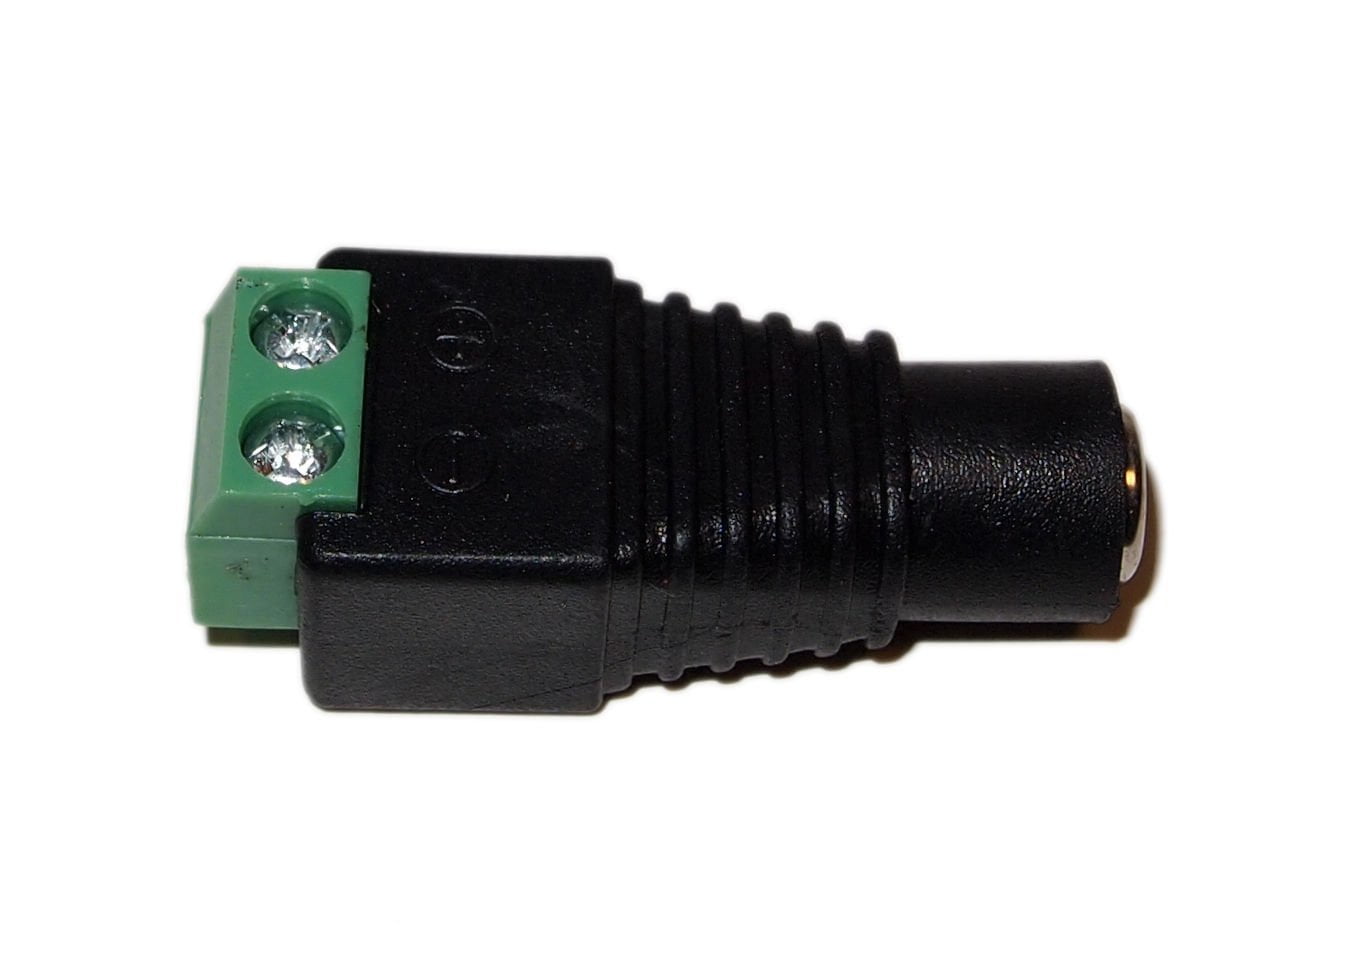 Female 2.1x5.5mm DC Power Plug Jack Adapter Connector for CCKY 10X 12V Male 